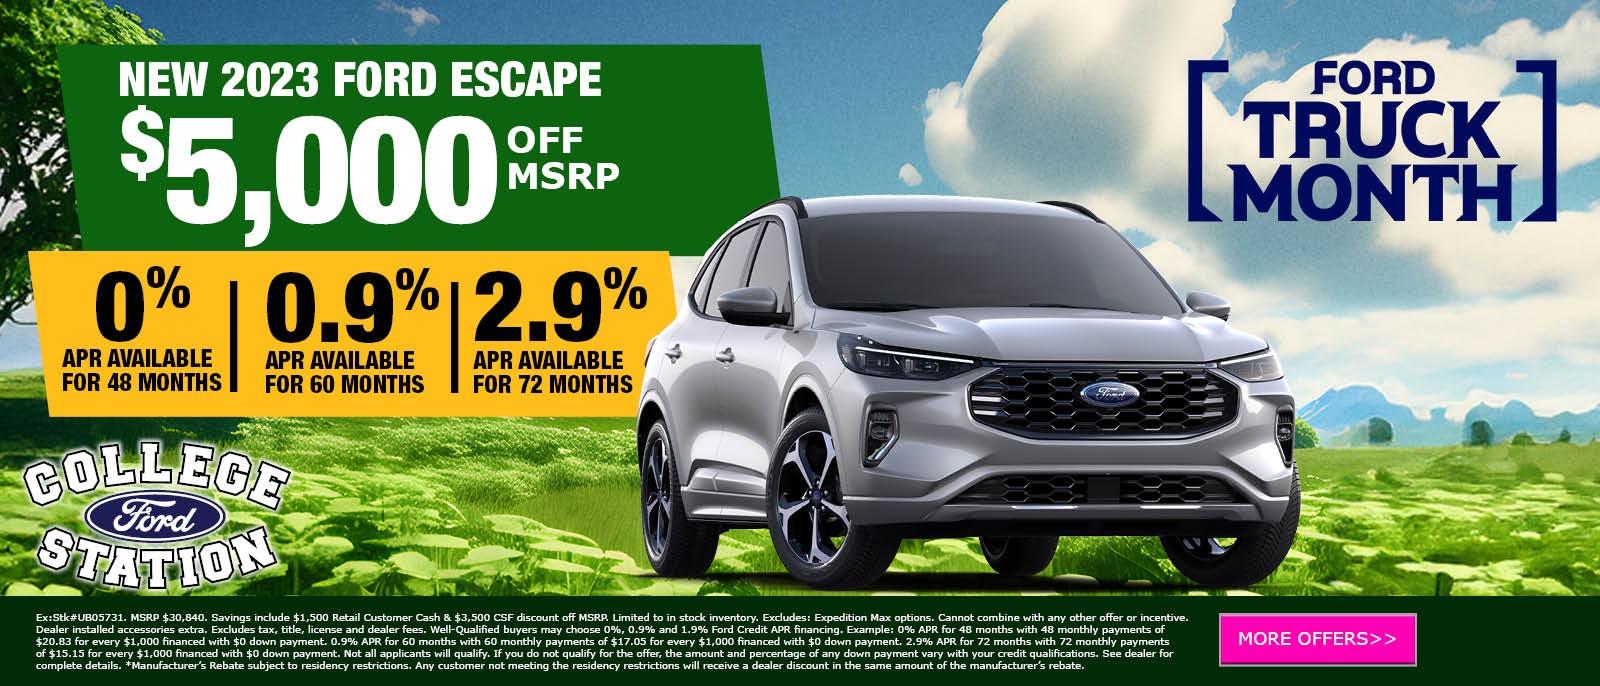 NEW 2023 FORD ESCAPE $5,000 OFF MSRP
$5,000 OFF MSRP
0% APR available for 48 Months
0.9% APR available for 60 Months
2.9% APR available for 72 Months